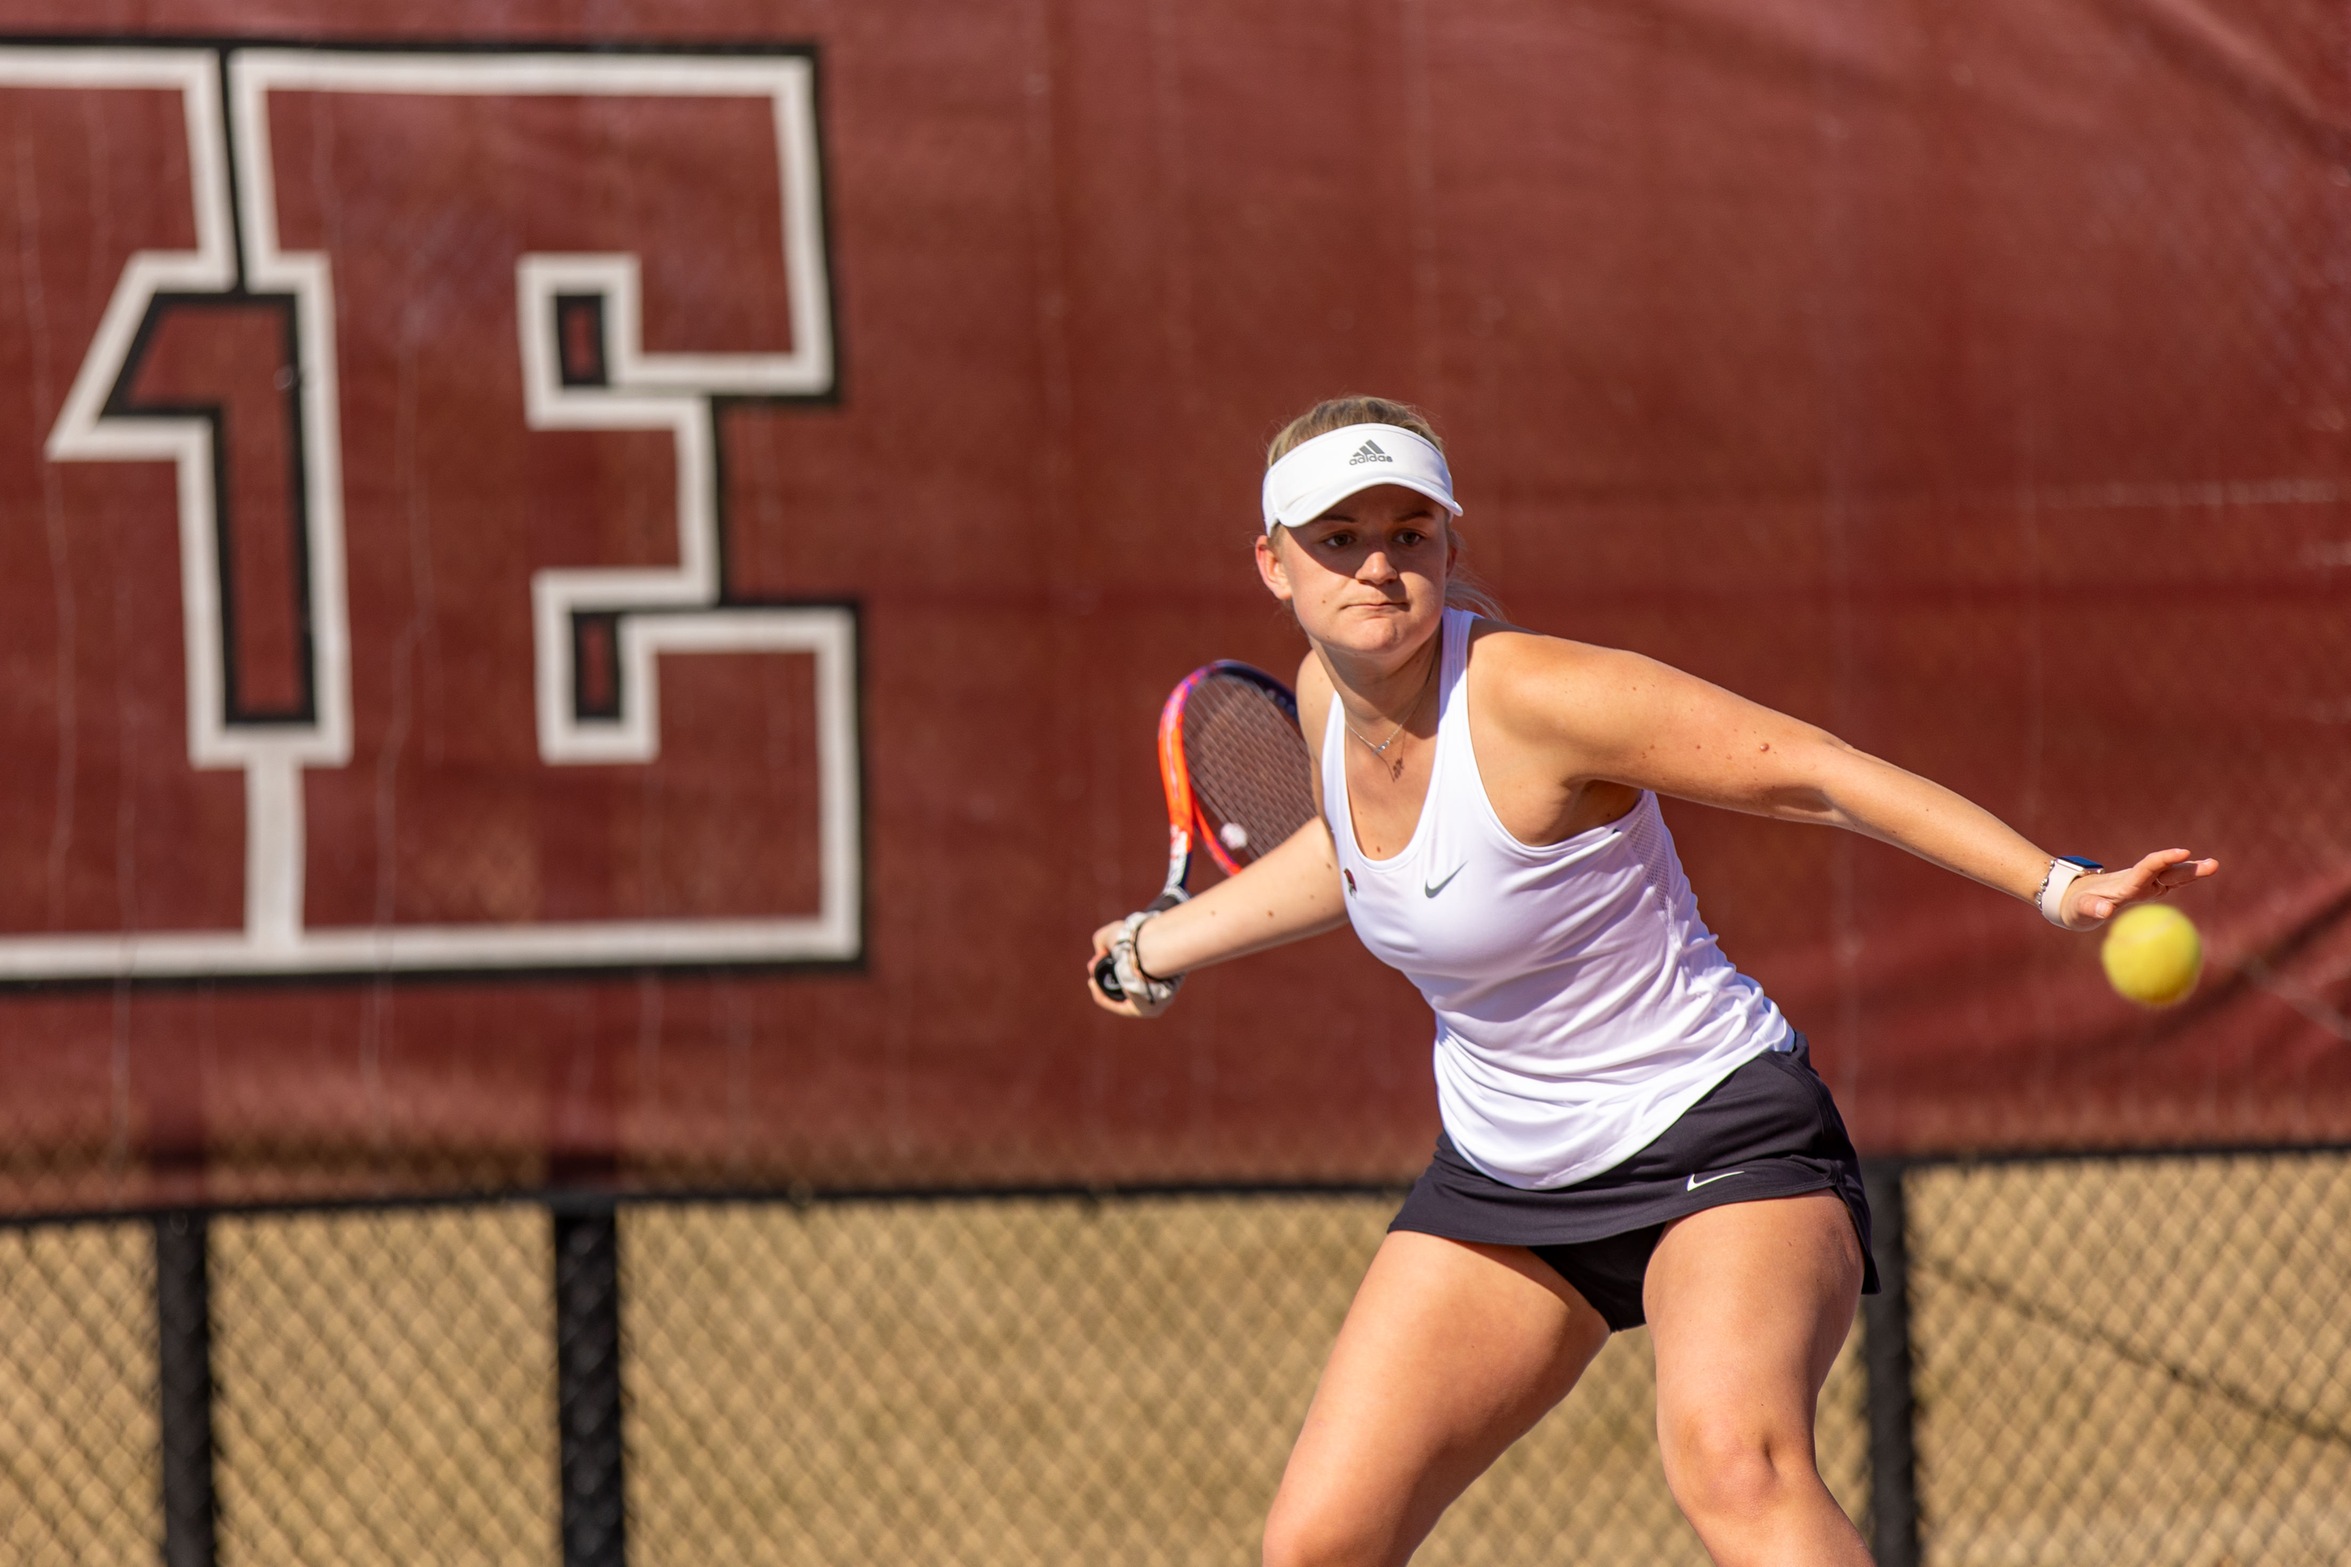 action photo of RC women's tennis player hitting a forehand